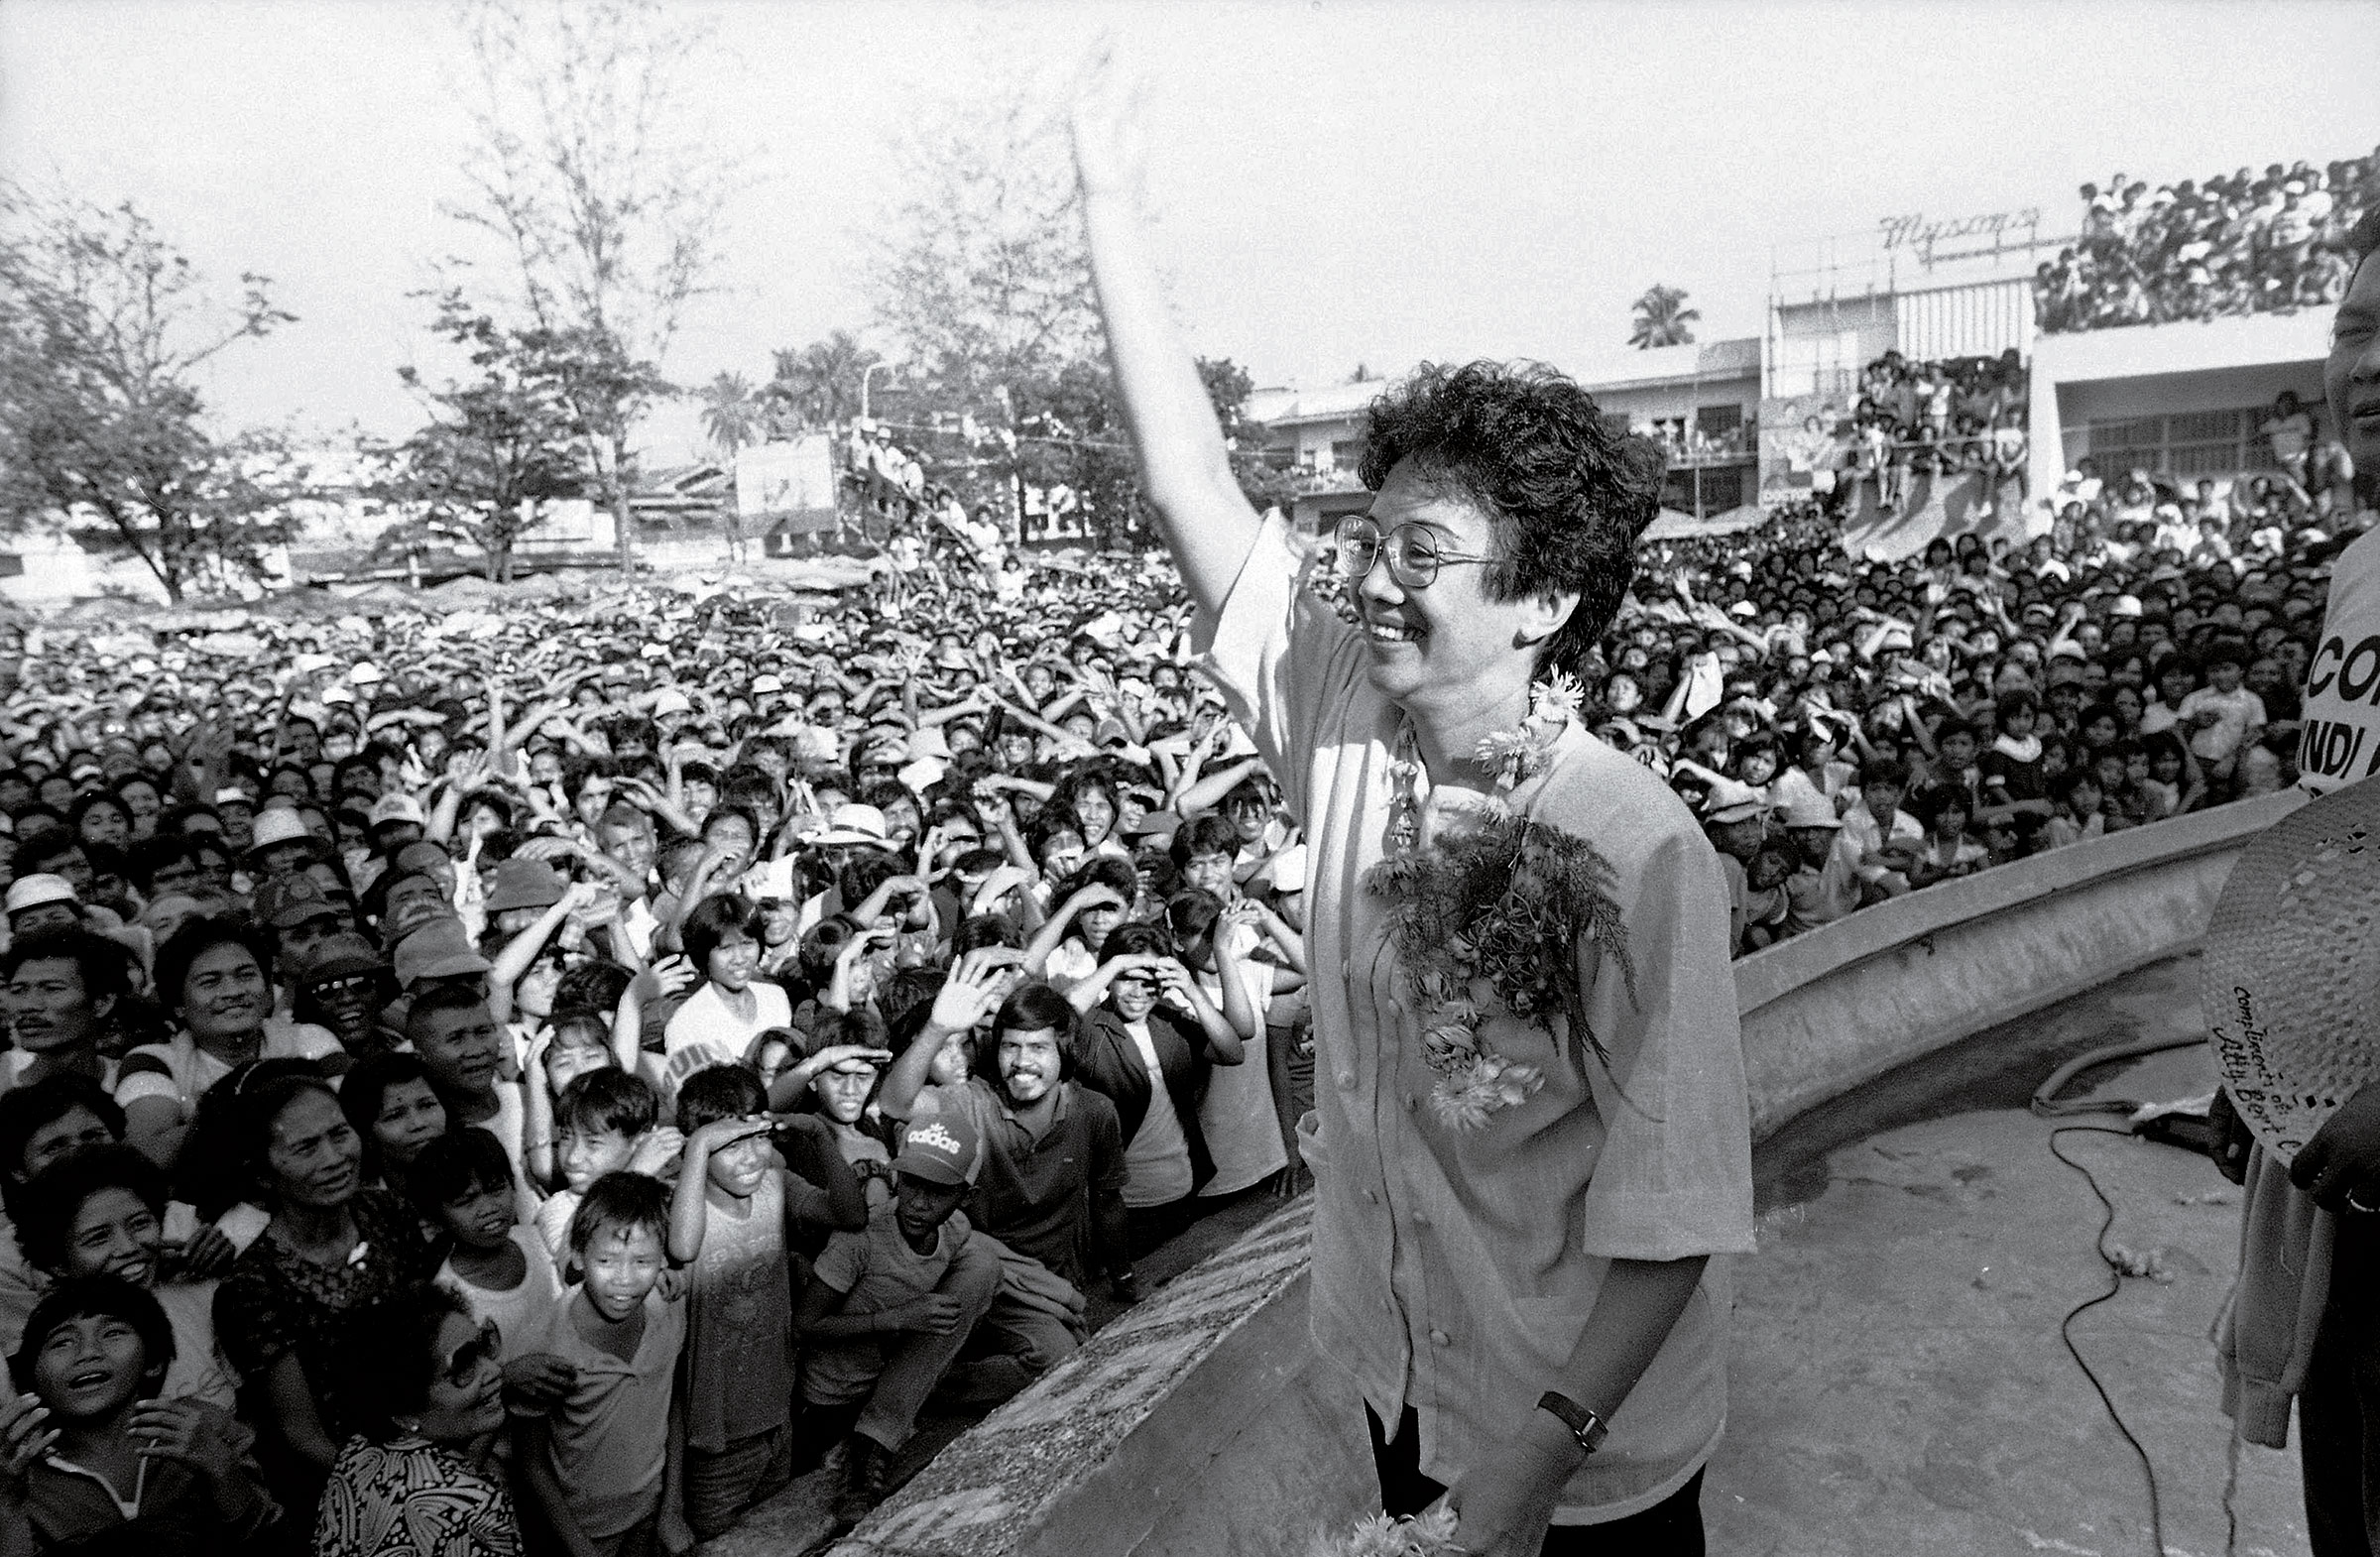 Opposition presidential candidate Corazon Aquino waves back at the crowd upon arrival for a campaign rally Jan. 20, 1986. (Val Rodriguez—AP)